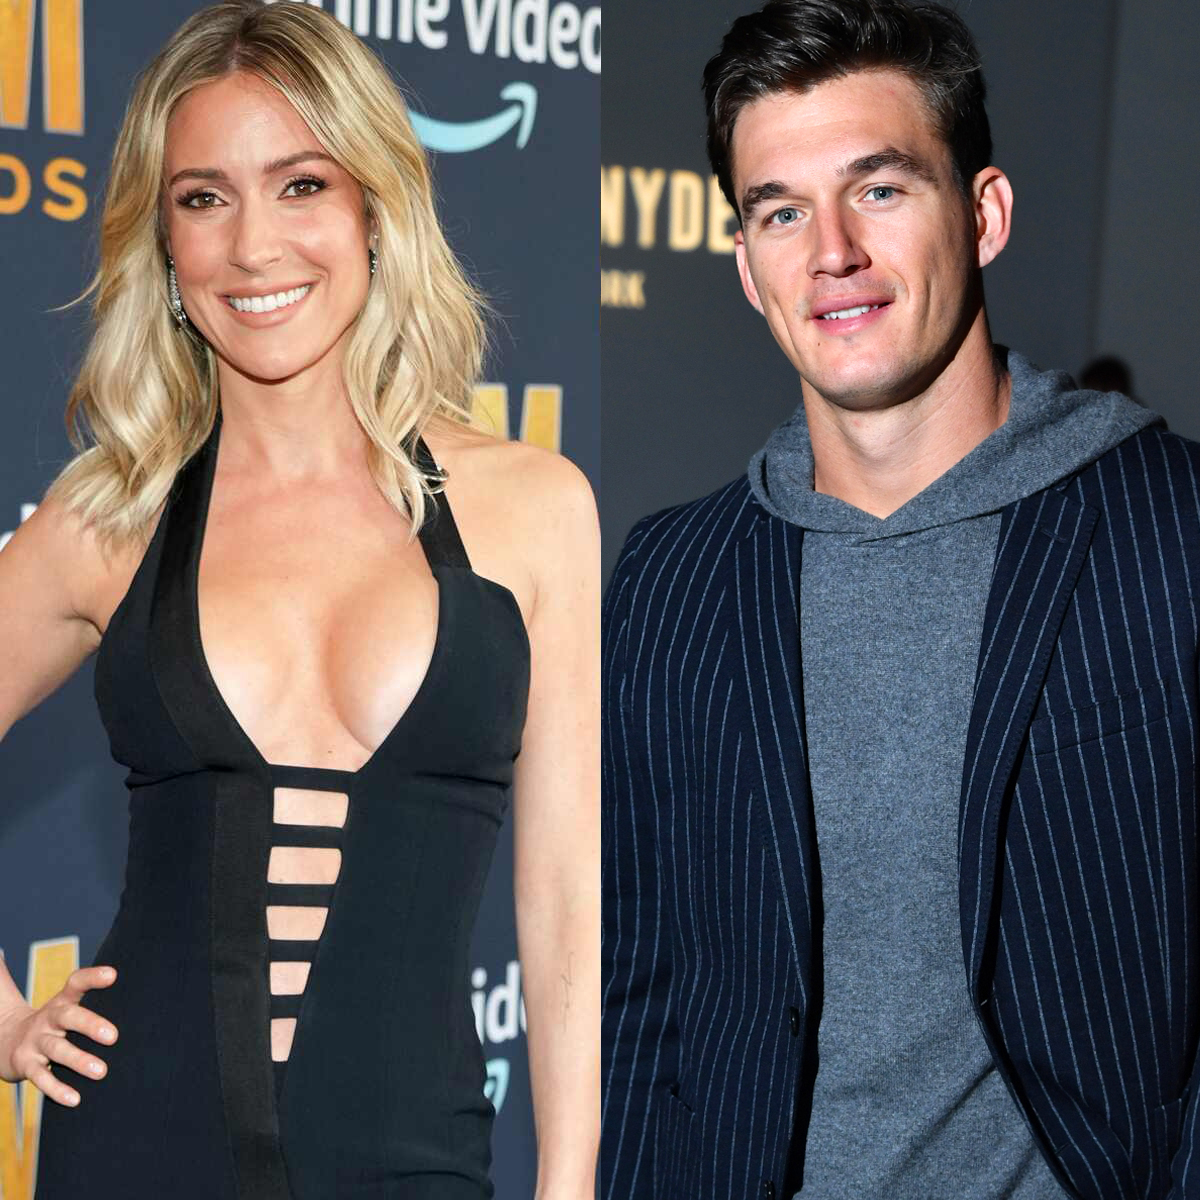 Tyler Cameron Addresses His Relationship Status After Spending Time With “Amazing” Kristin Cavallari – E! Online